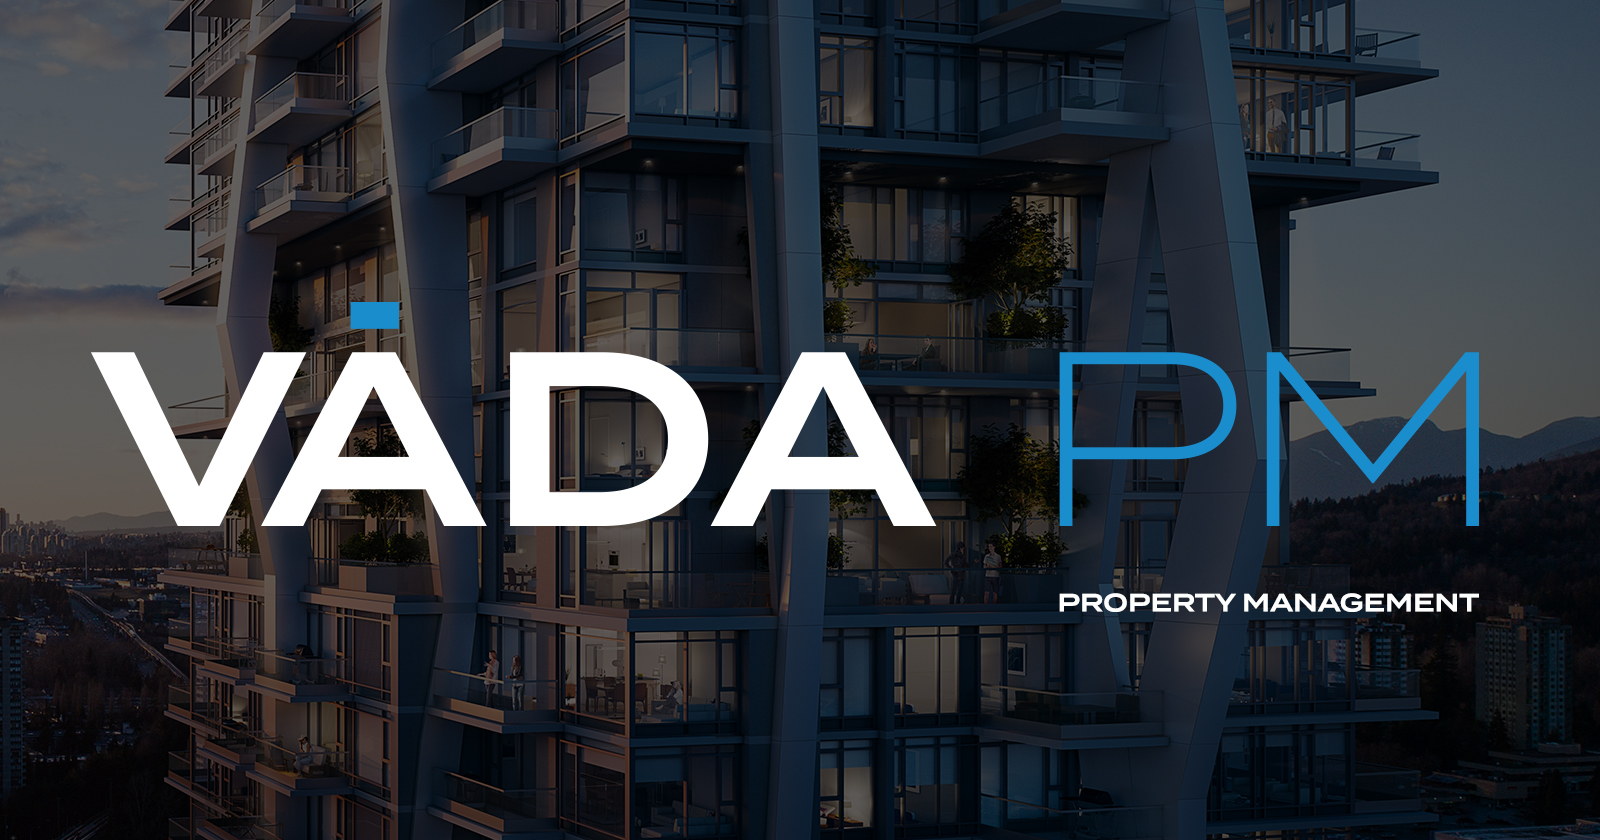 VADA: Residential & Commercial Property Management Services Greater Vancouver Lower Mainland.